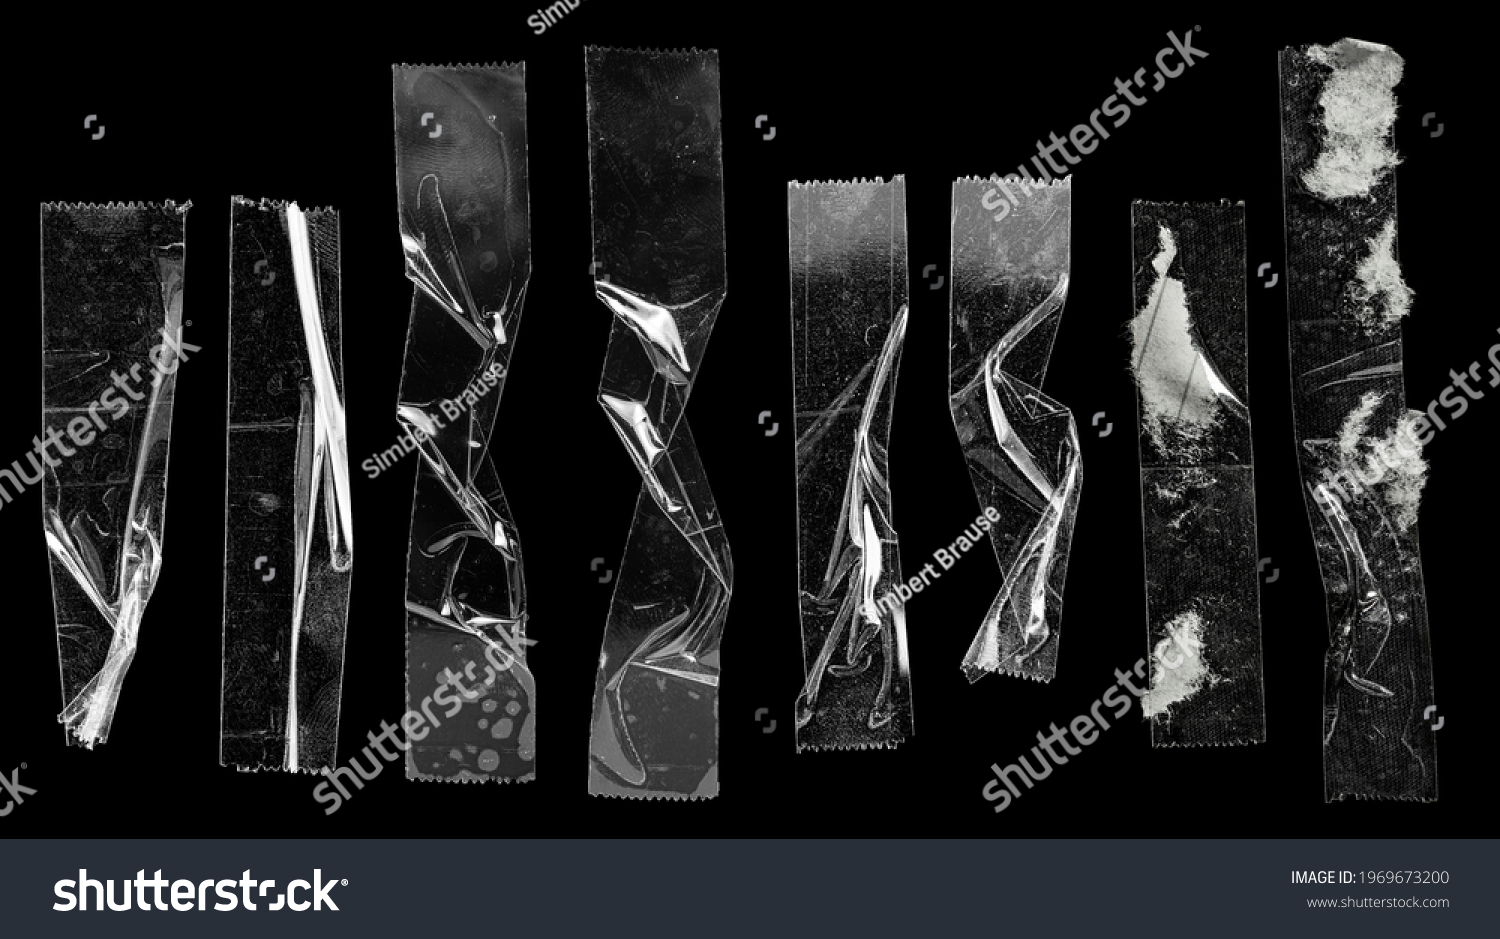 cool set of transparent adhesive tape or strips isolated on black background, crumpled plastic sticky snips, poster design overlays or elements. #1969673200